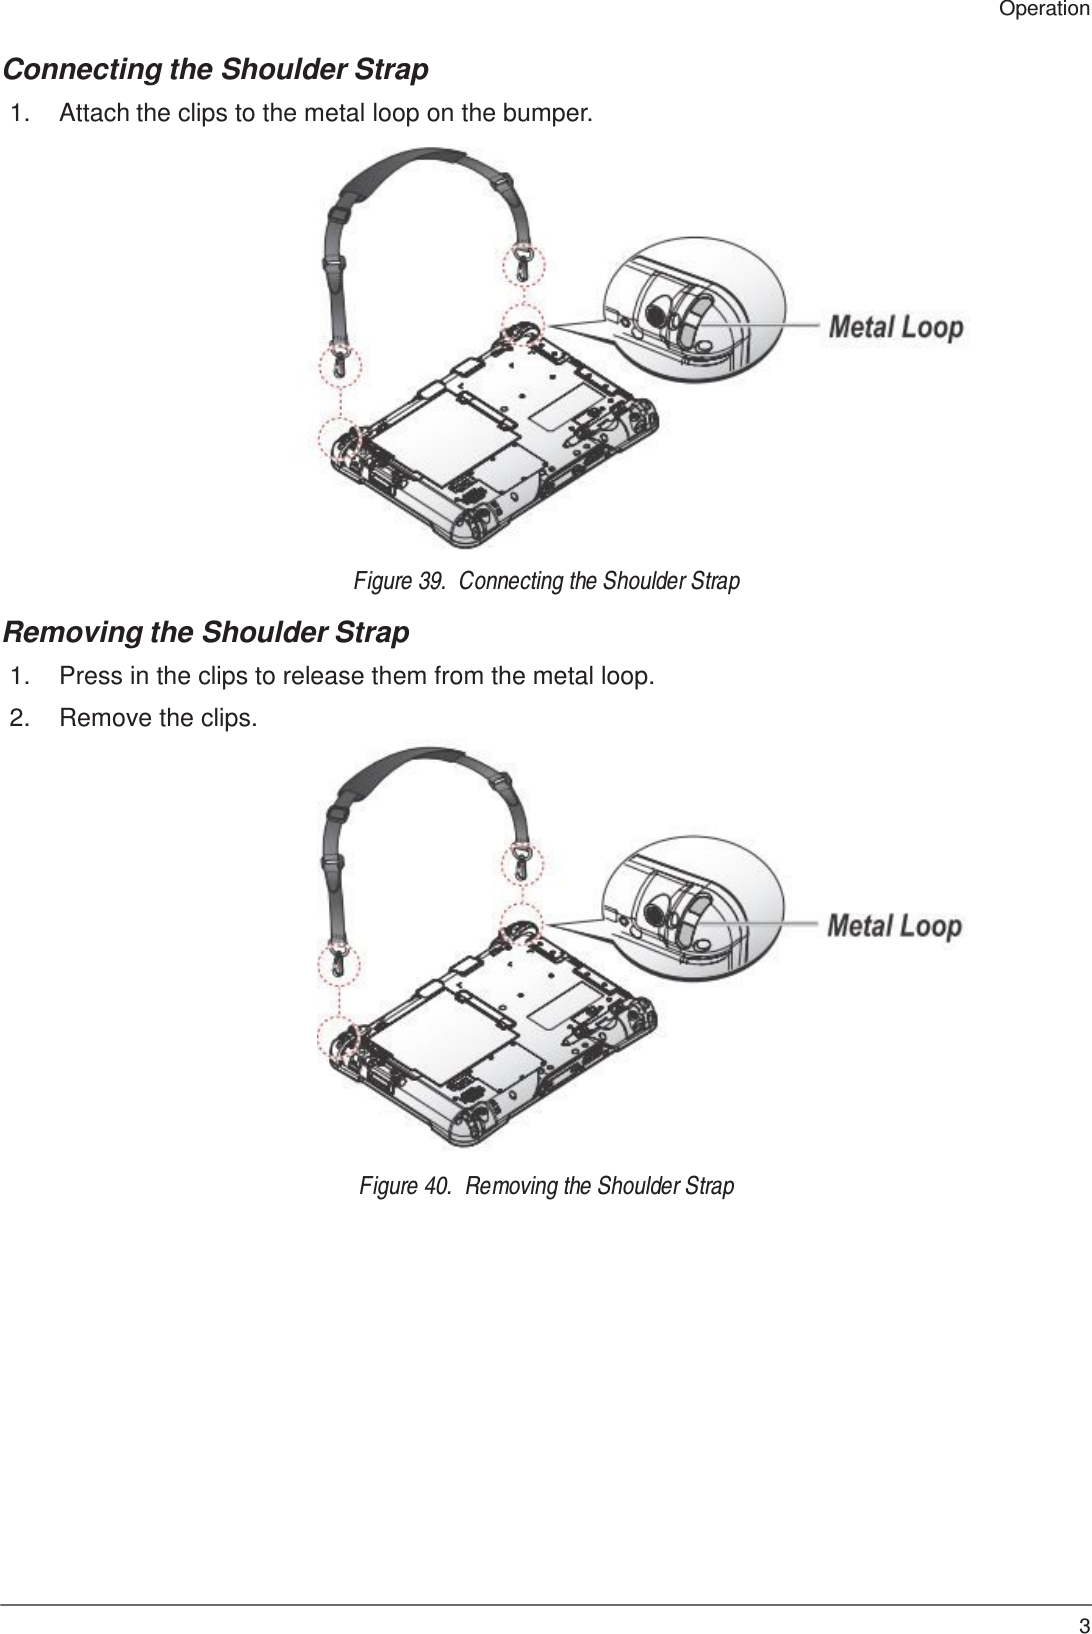 31 Operation    Connecting the Shoulder Strap  1.  Attach the clips to the metal loop on the bumper.                       Figure 39.  Connecting the Shoulder Strap  Removing the Shoulder Strap  1.  Press in the clips to release them from the metal loop.  2.  Remove the clips.                       Figure 40.  Removing the Shoulder Strap 